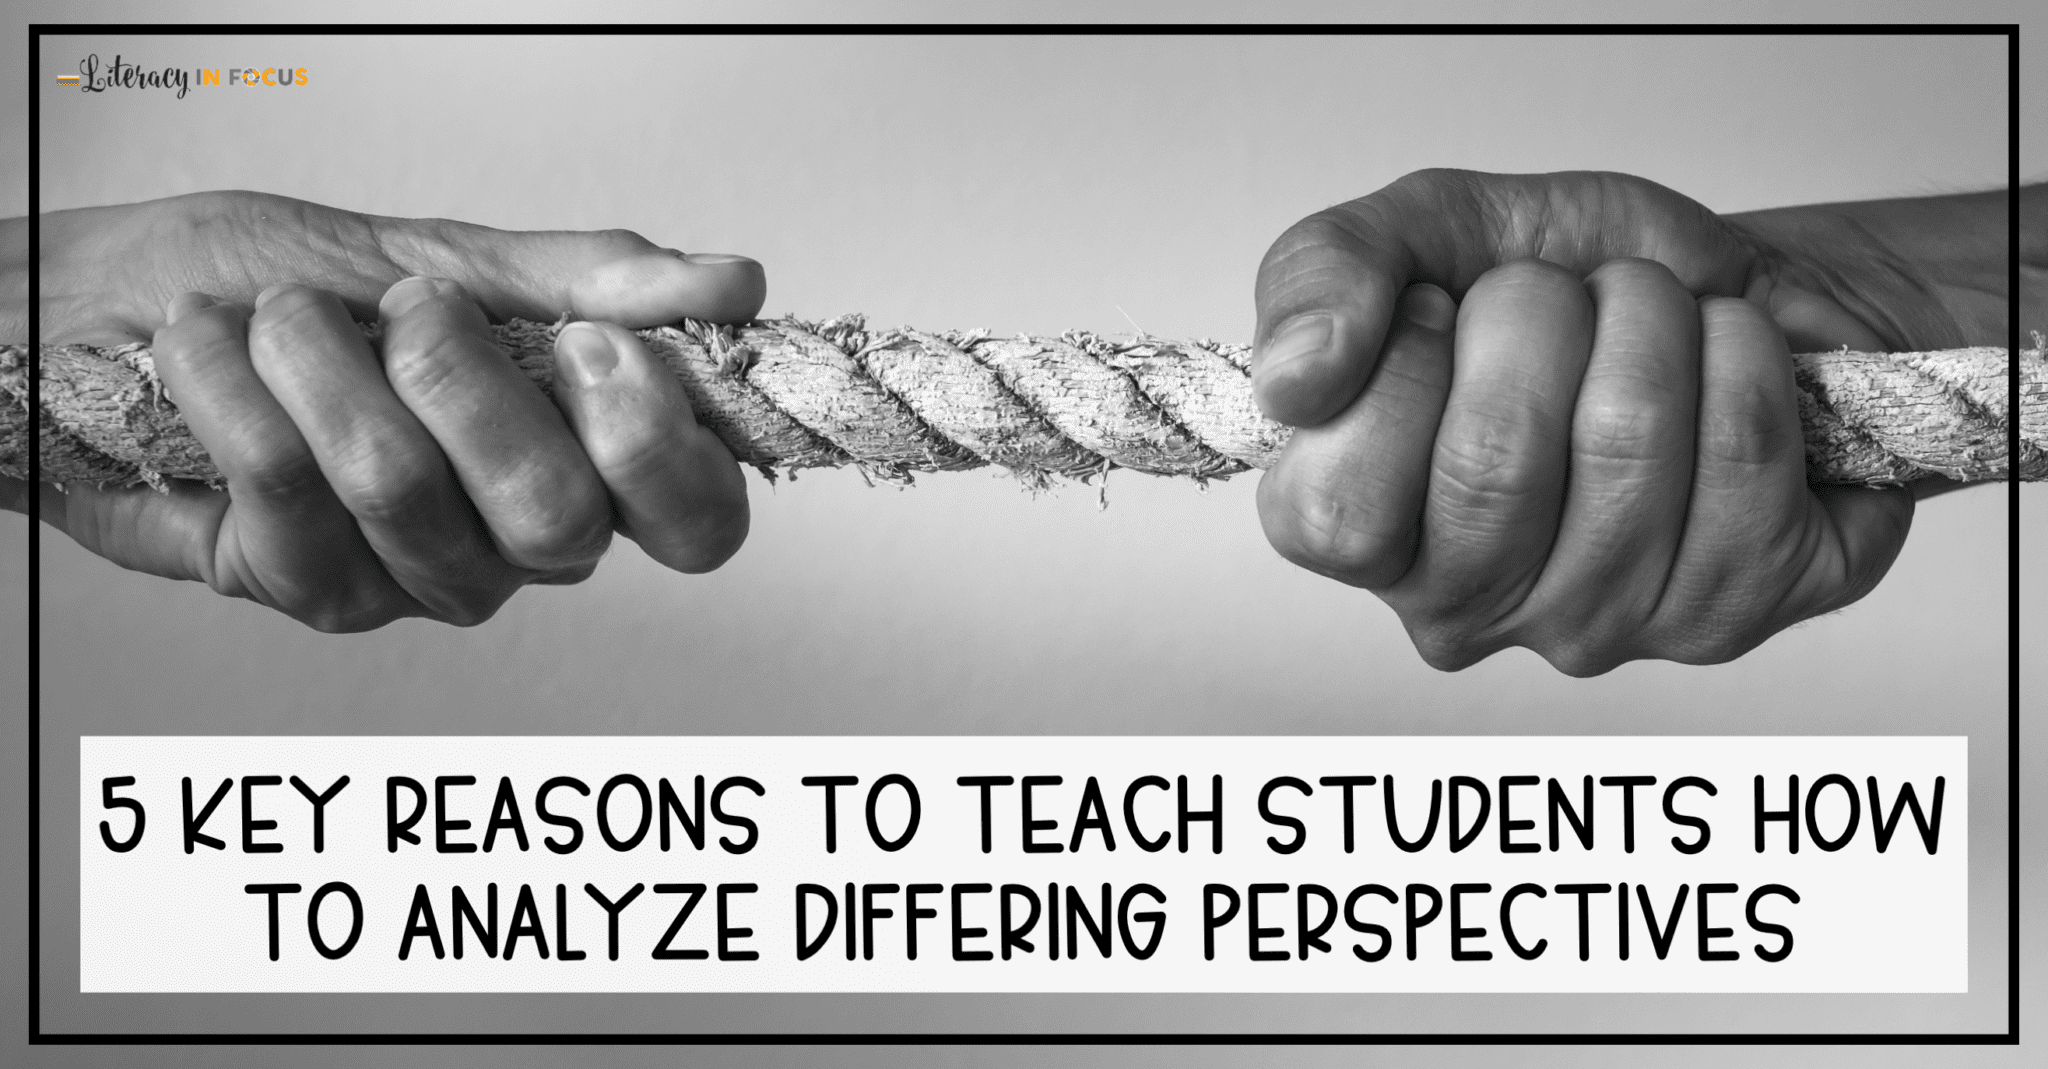 5-key-reasons-to-teach-students-how-to-analyze-differing-perspectives-literacy-in-focus